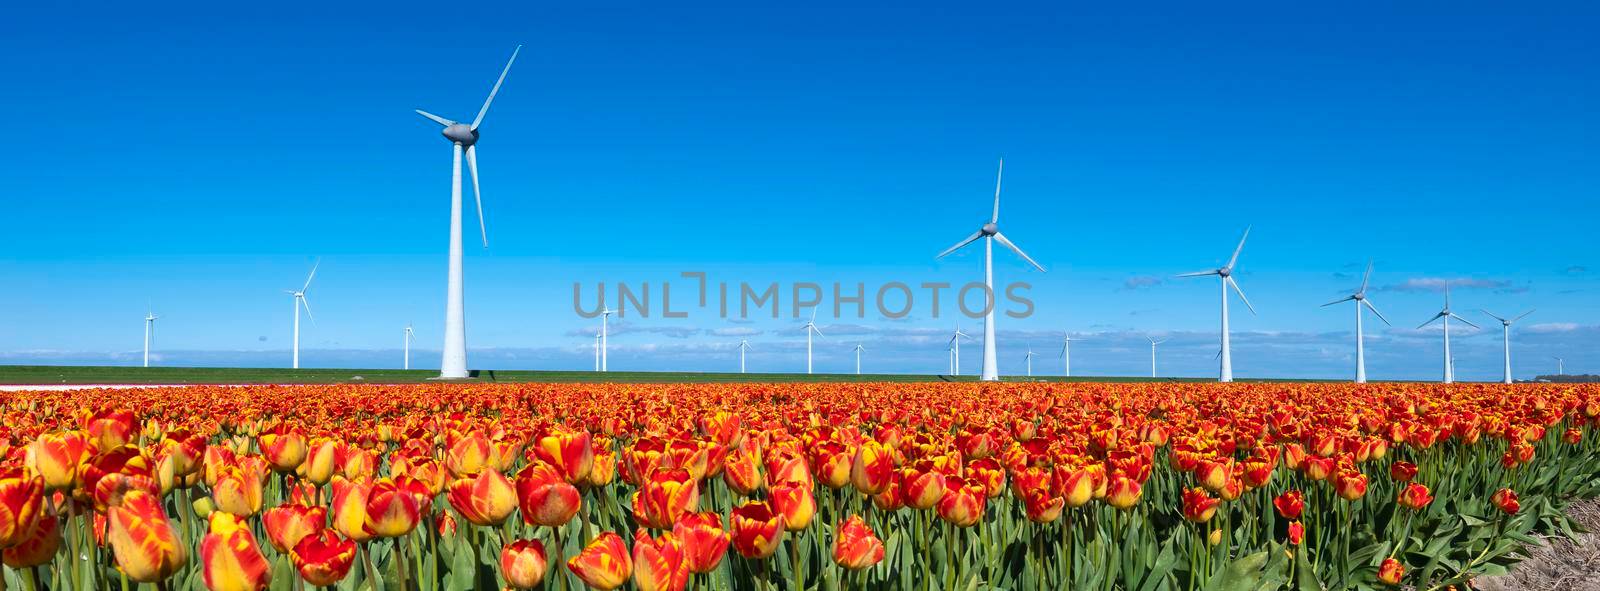 field with yellow red tulips near wind turbines in holland under blue sky by ahavelaar